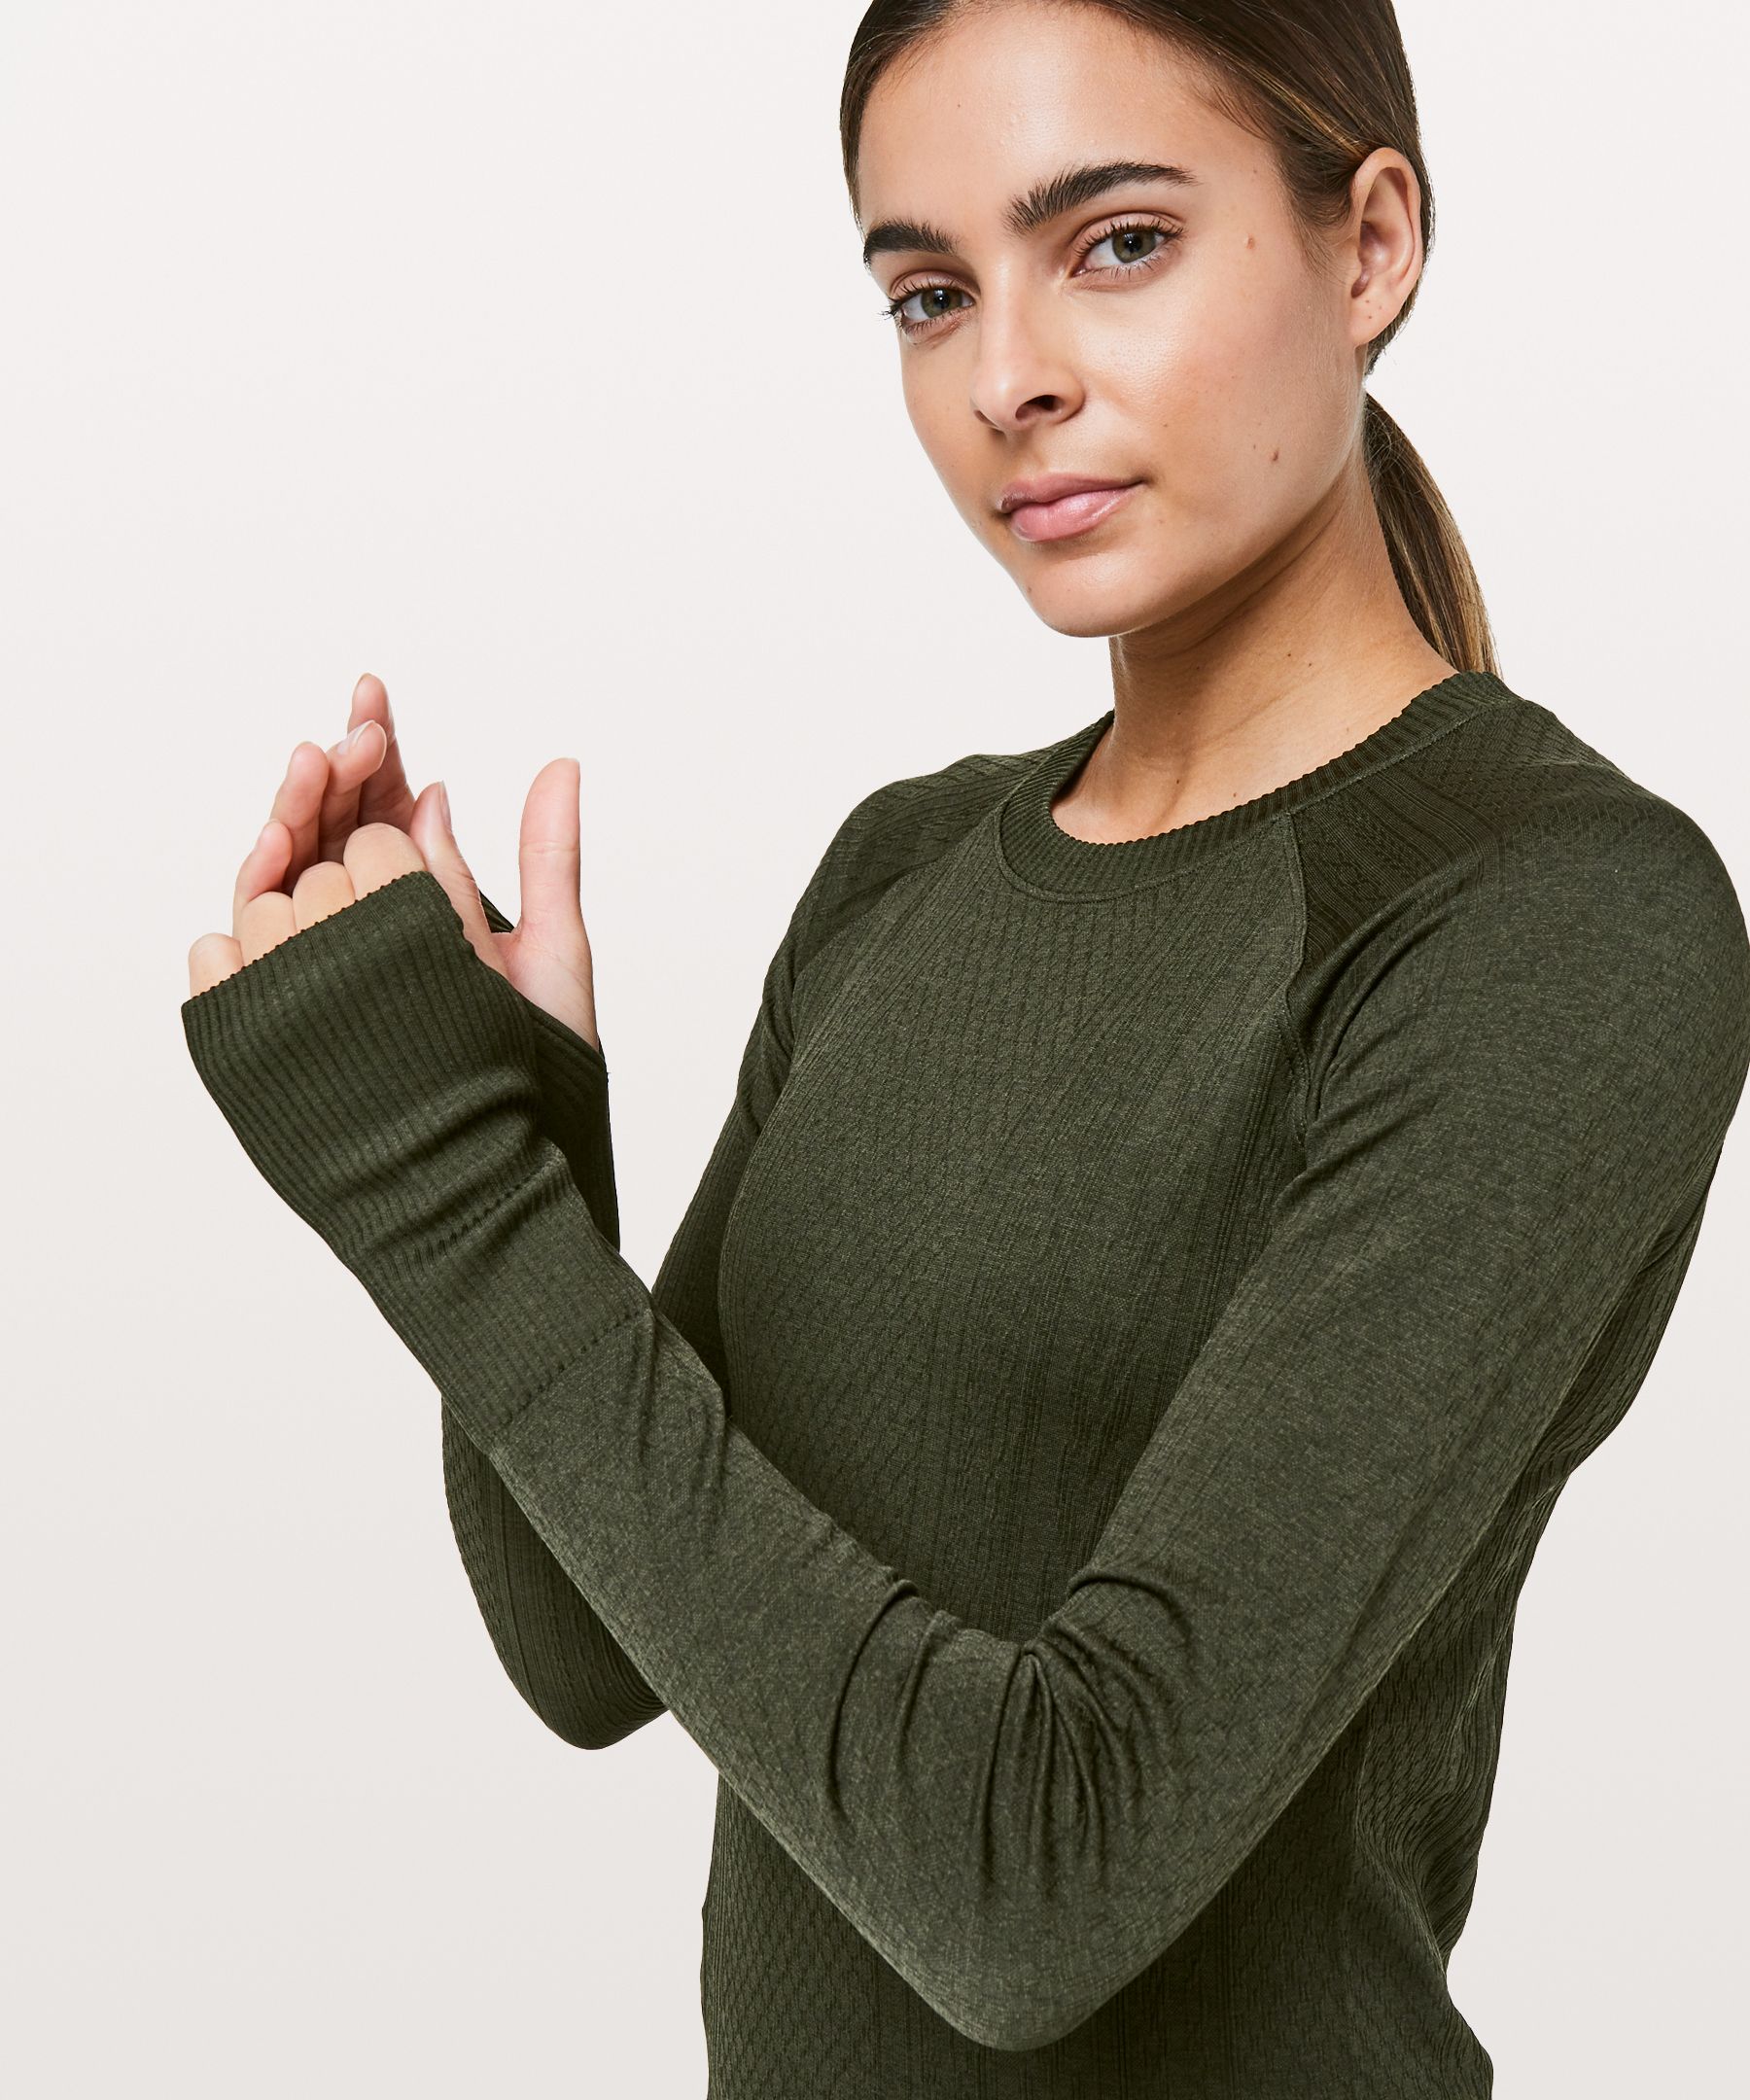 Lululemon rest less pullover review 3 - Agent Athletica